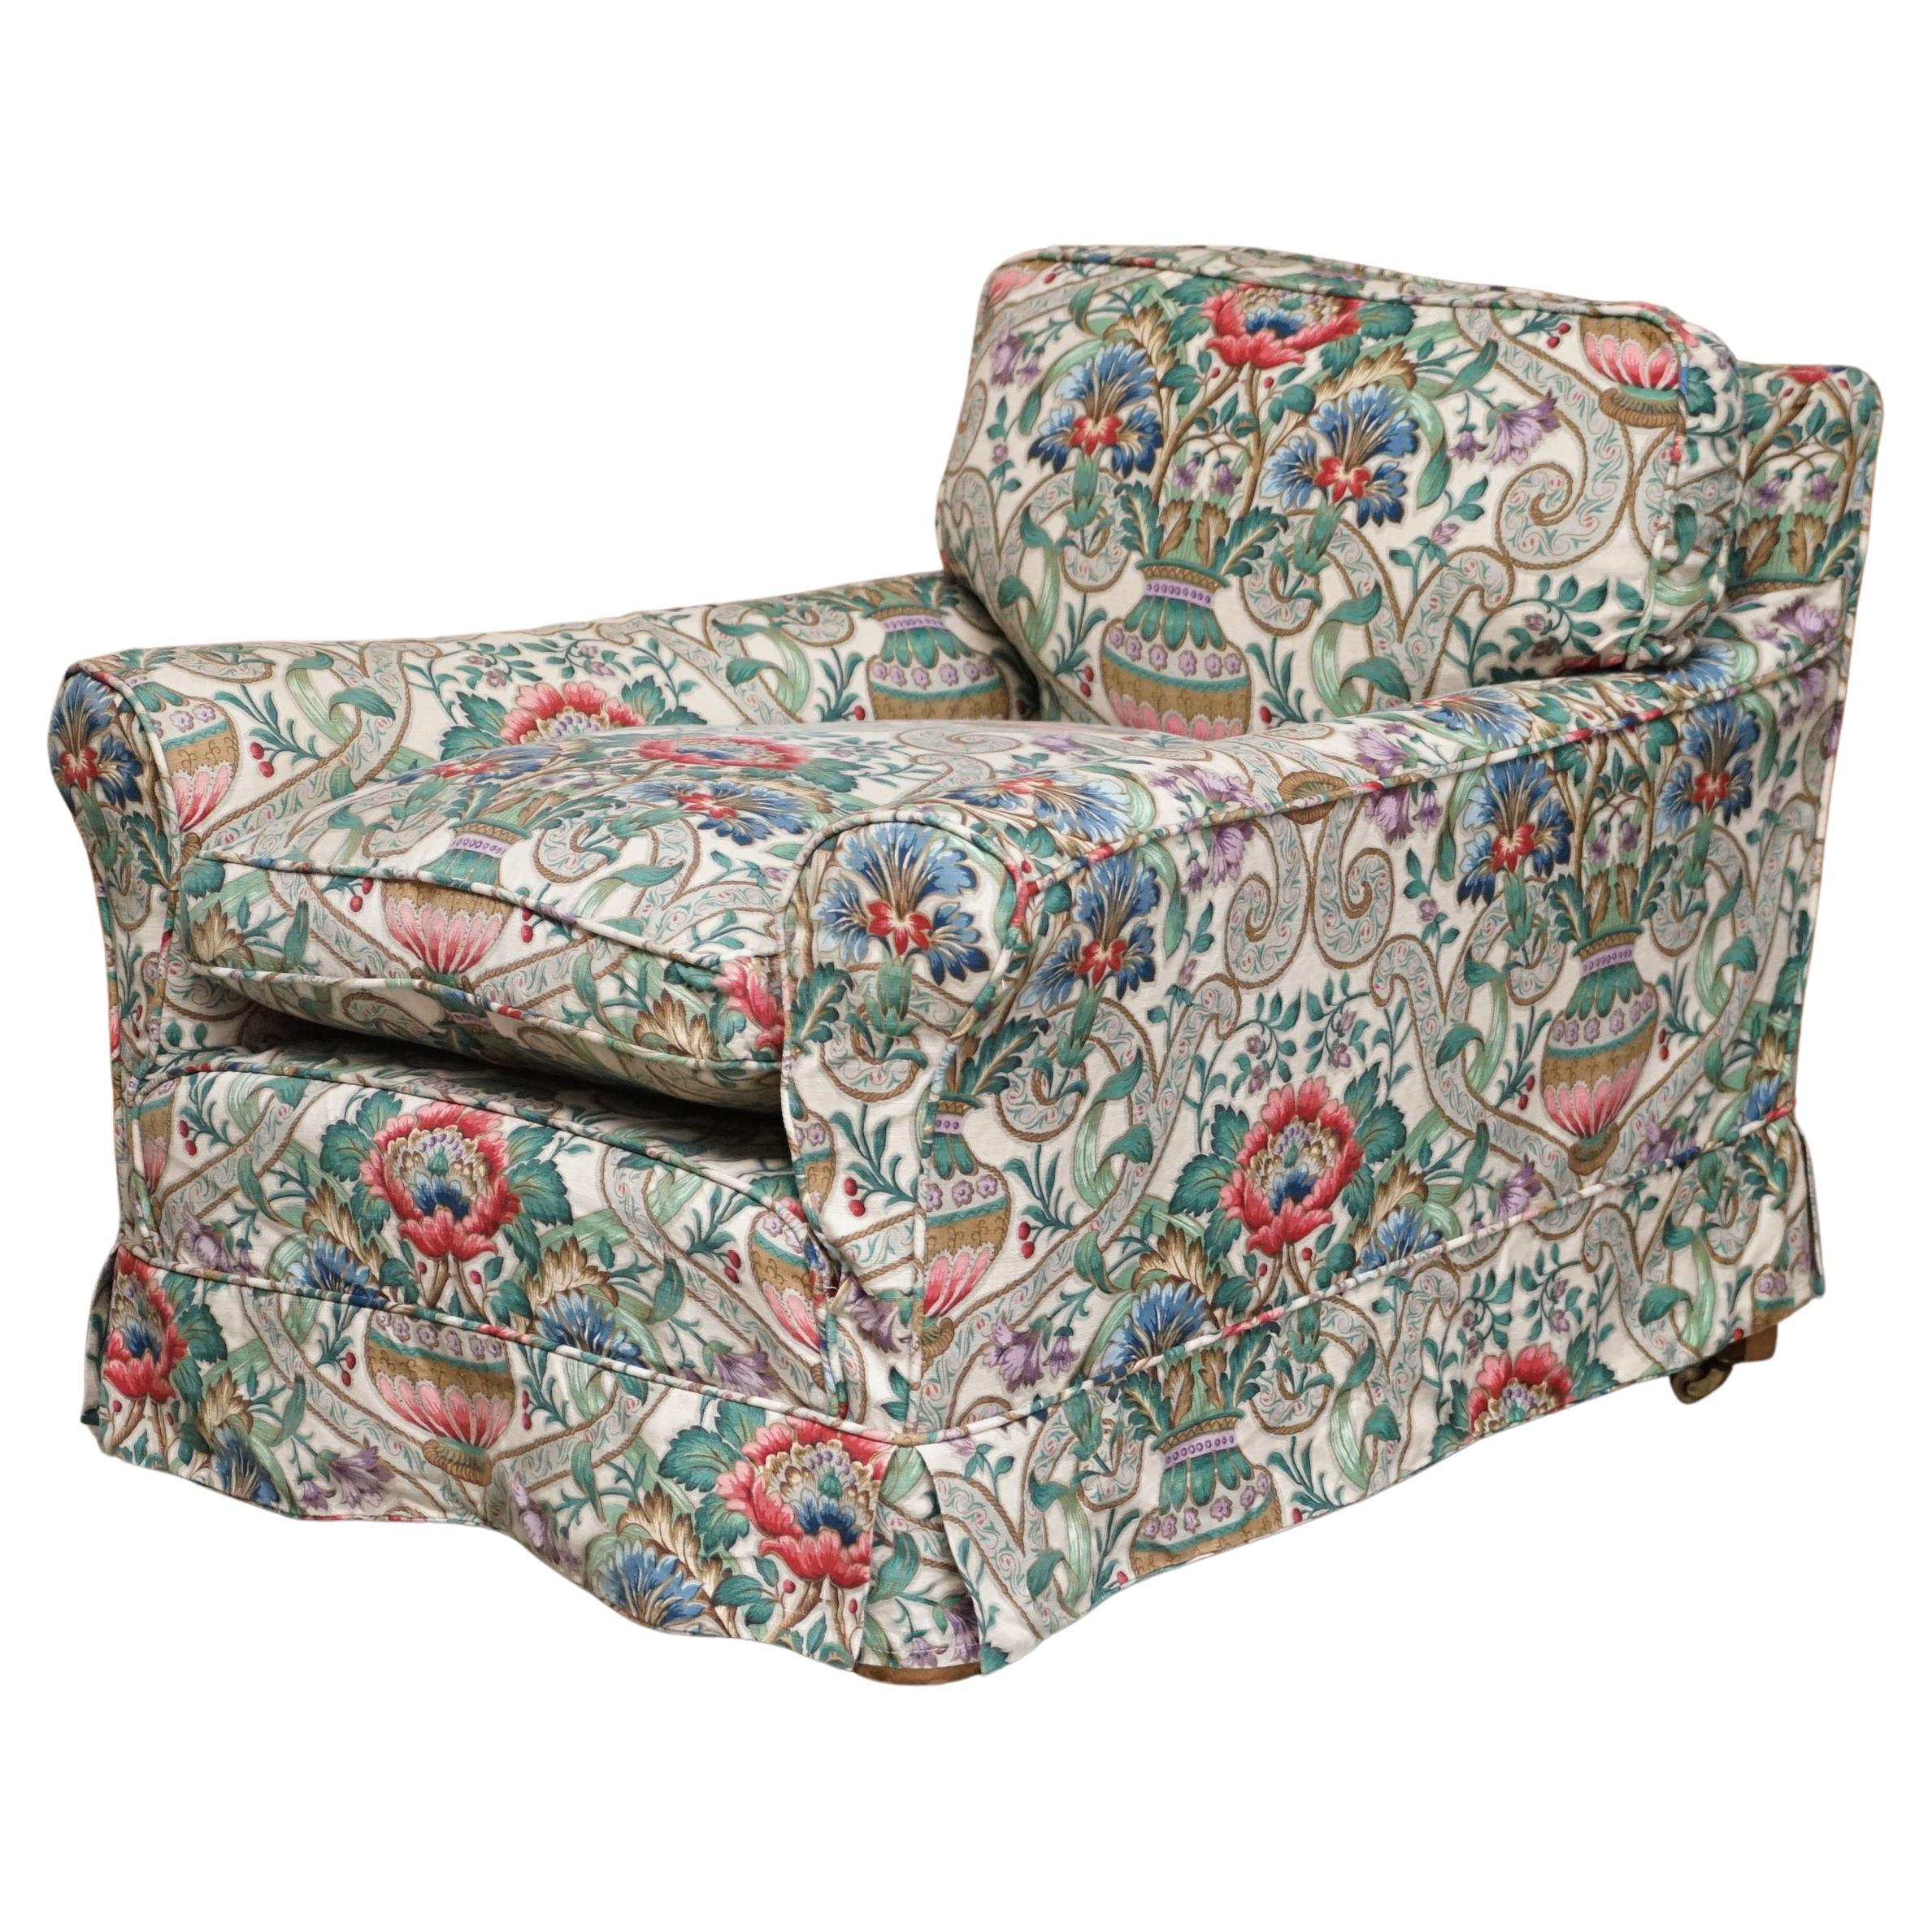 Antique Victorian circa 1900 Club Armchair with Chintz Embroidered Upholstery For Sale